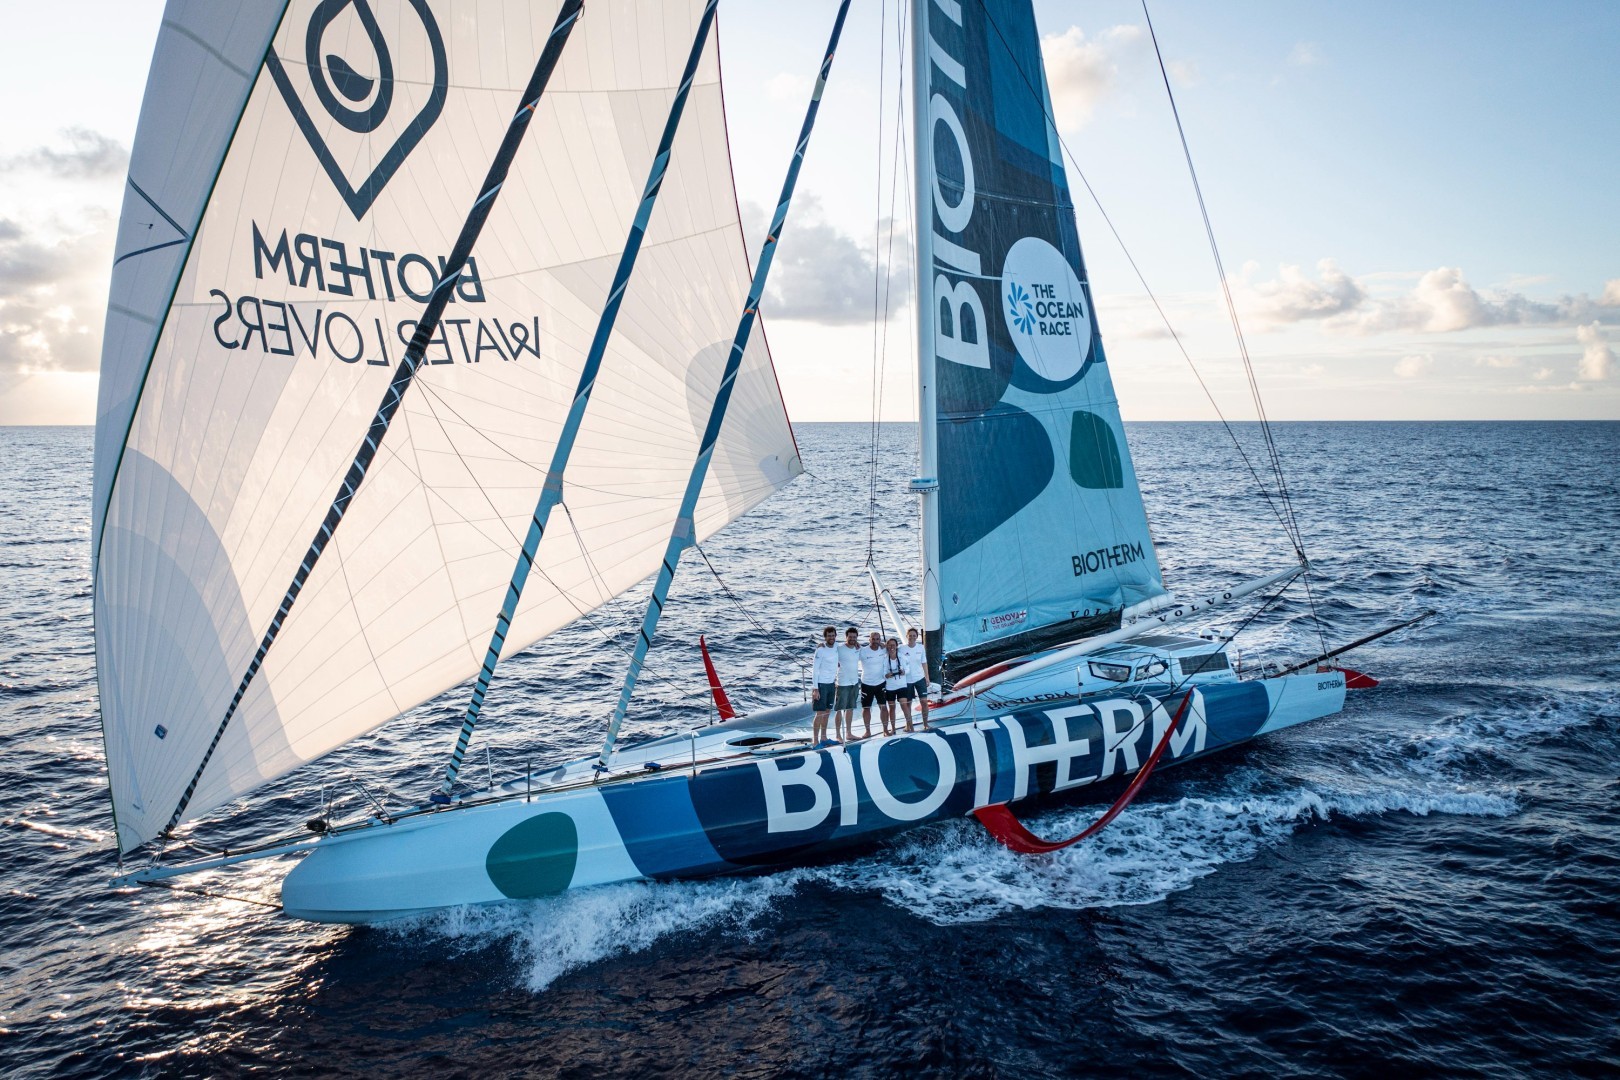 3 February 2023, Leg 2 onboard Biotherm. Drone view.
© Anne Beauge / Biotherm